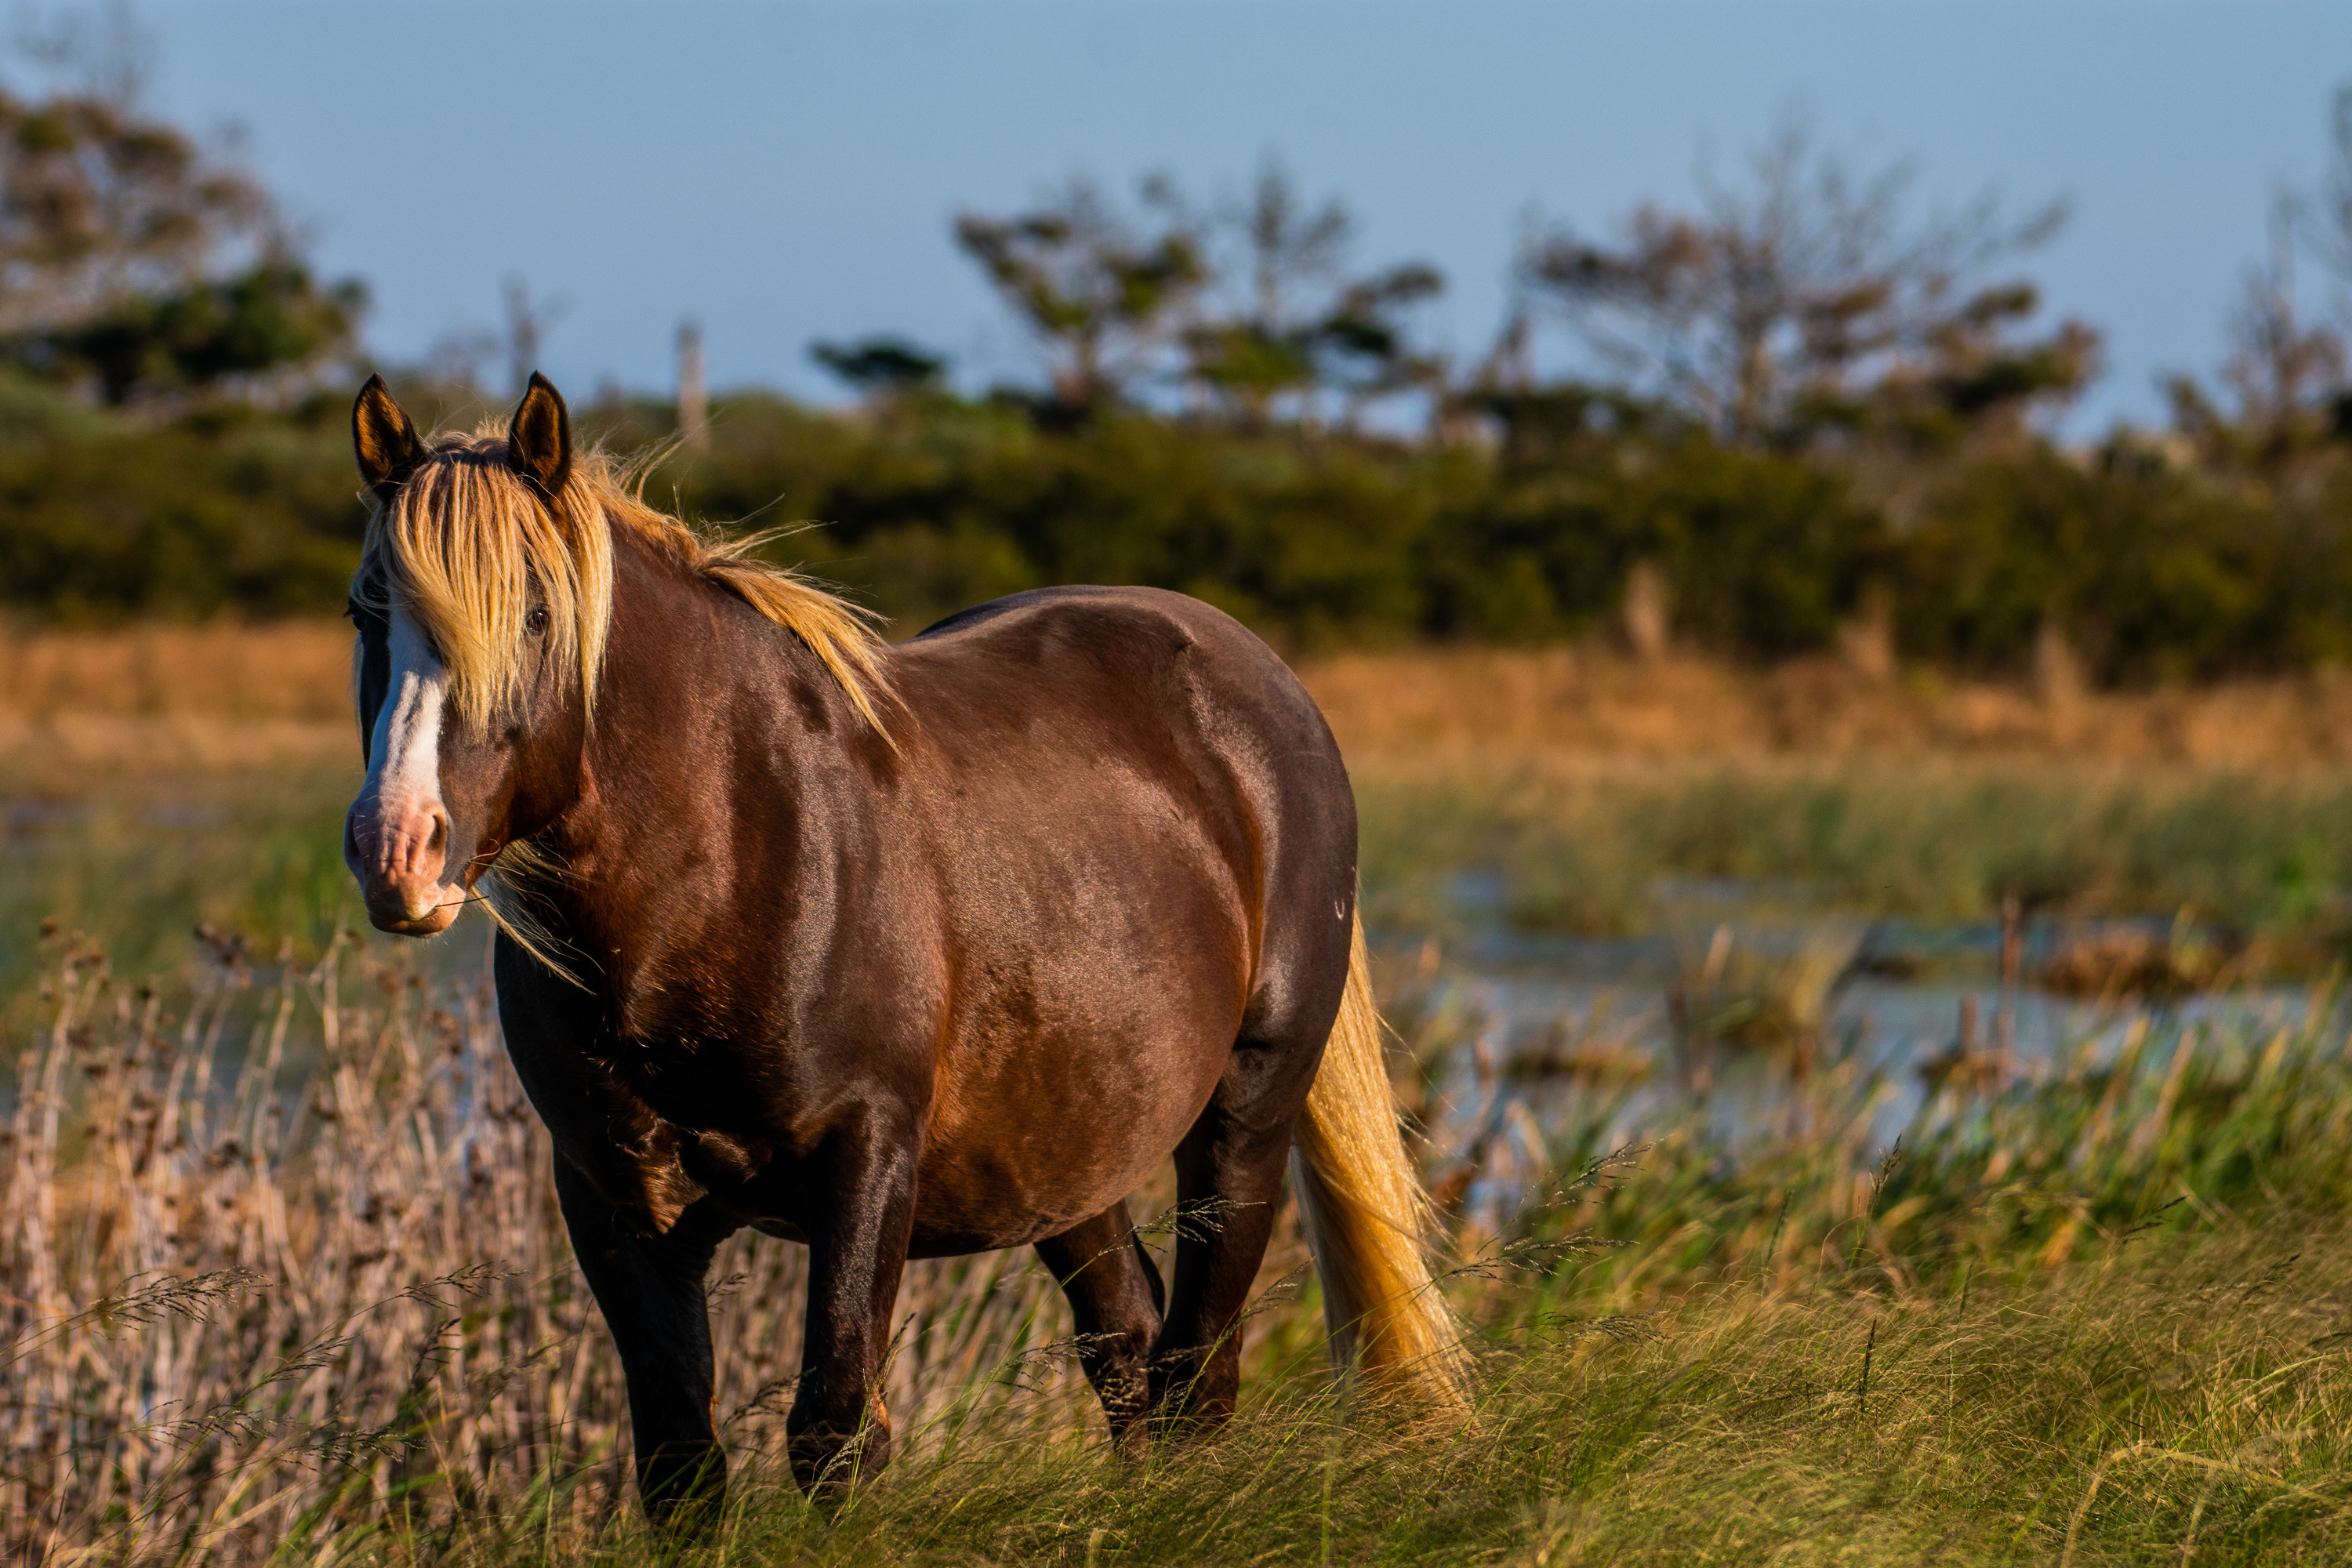 A wild pony standing in marshlands